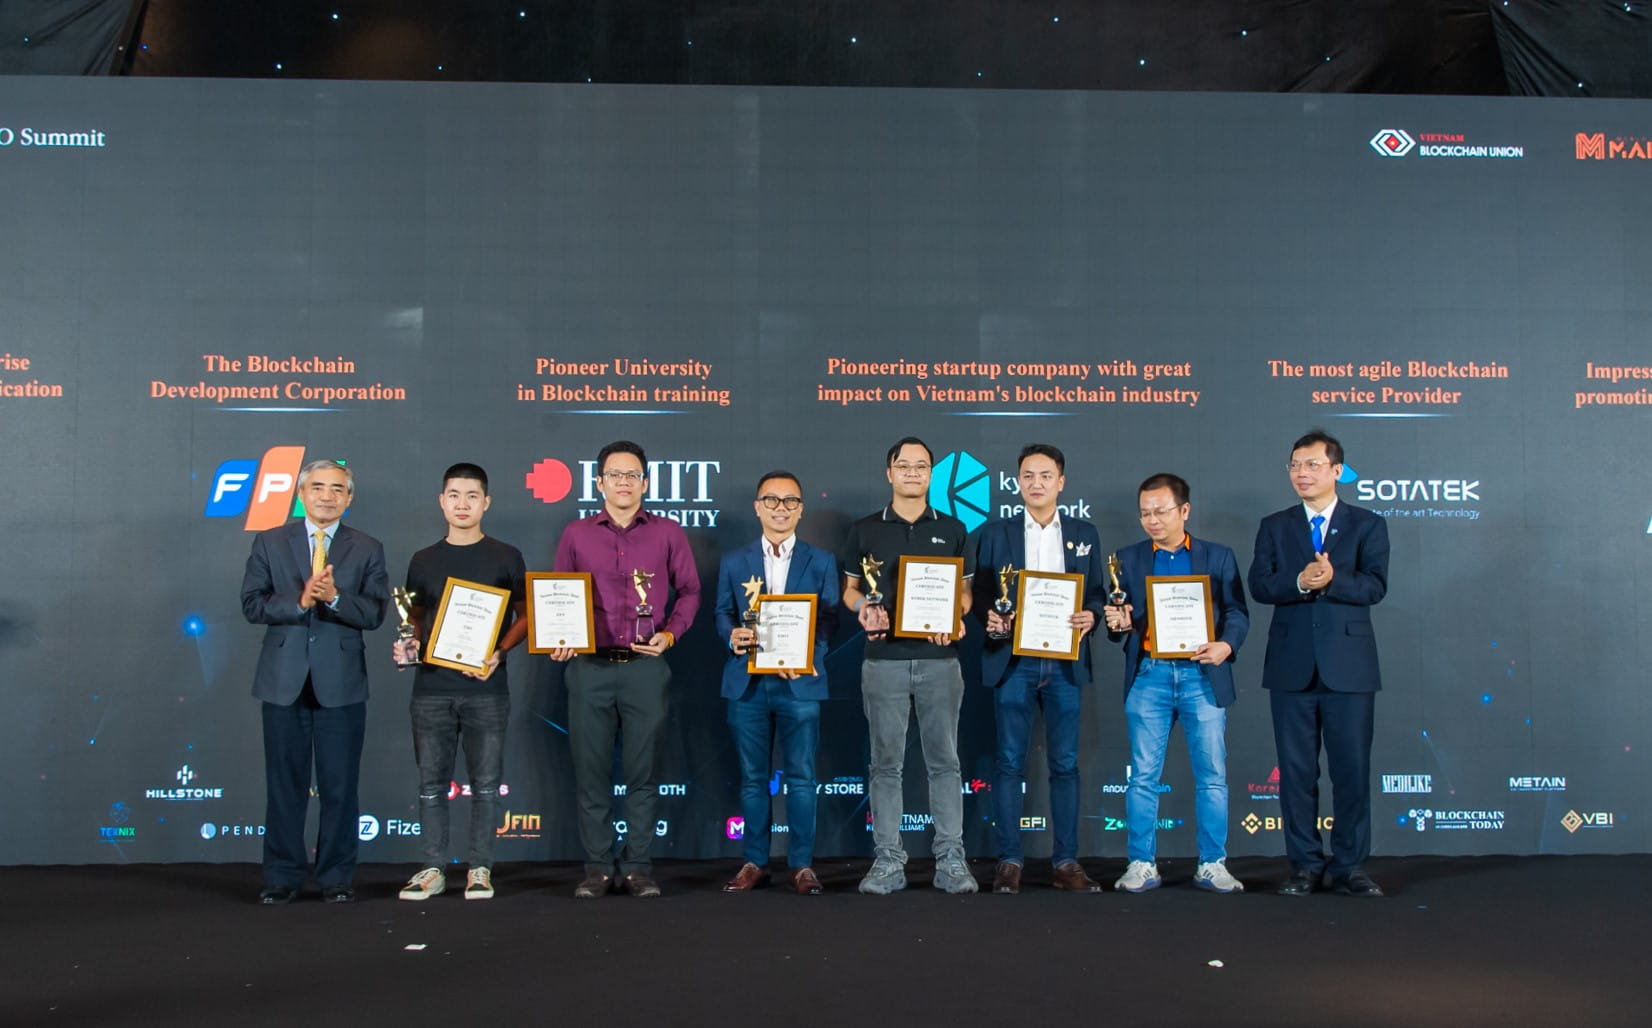 Representative of FPT Corporation (the third one on the left-hand side of the photo) received the award "Blockchain Development Pioneer of the Year"